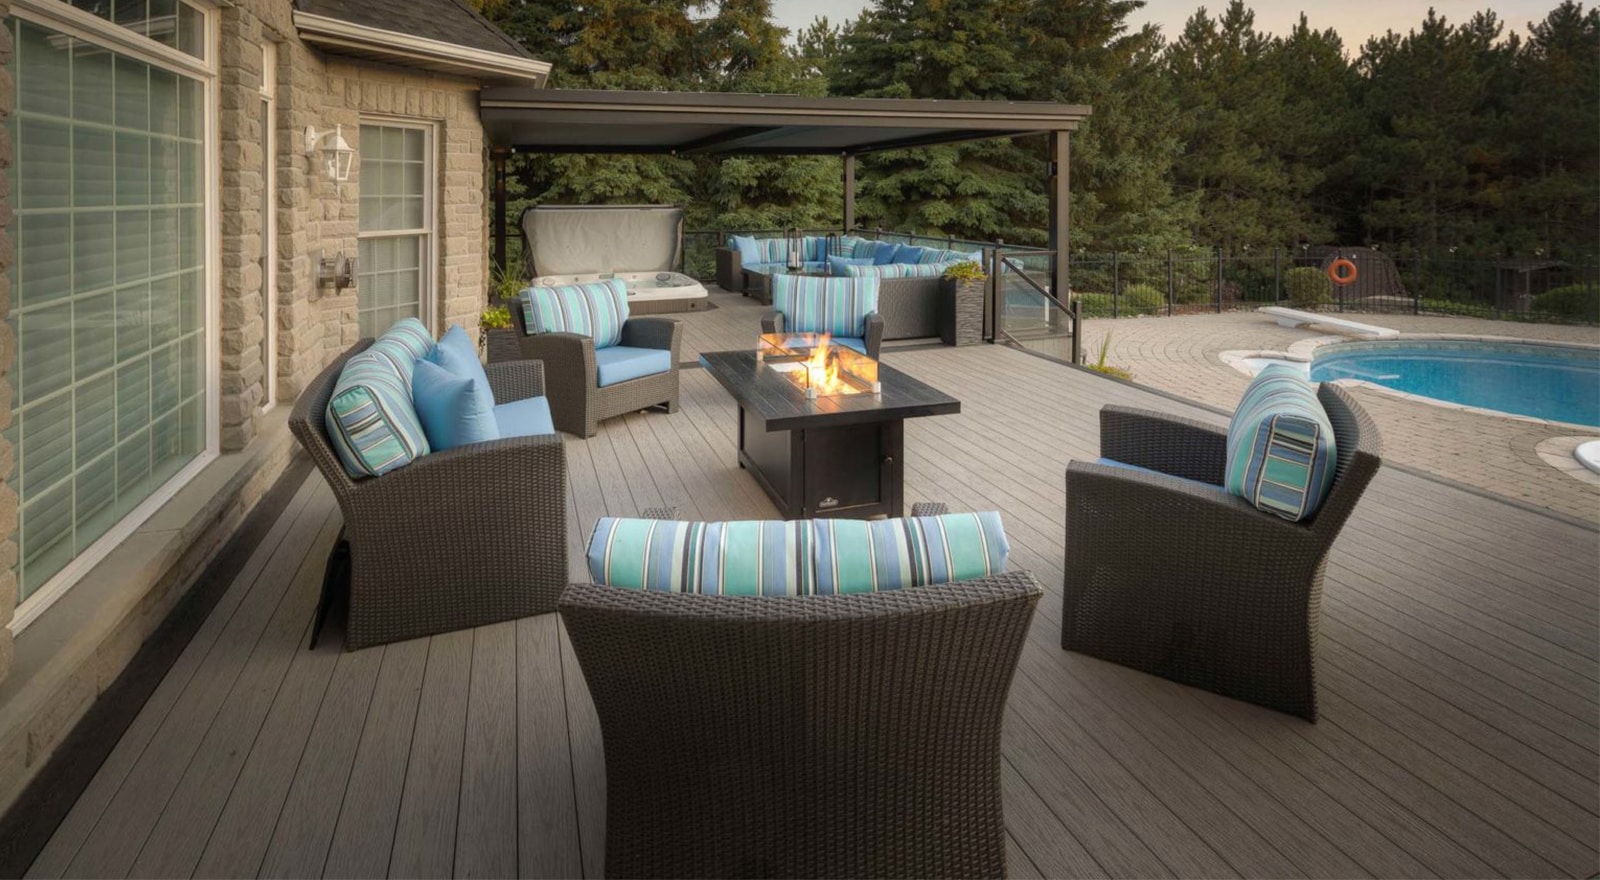 TIVA Building Products image showing a backyard deck covered in TIVAdek